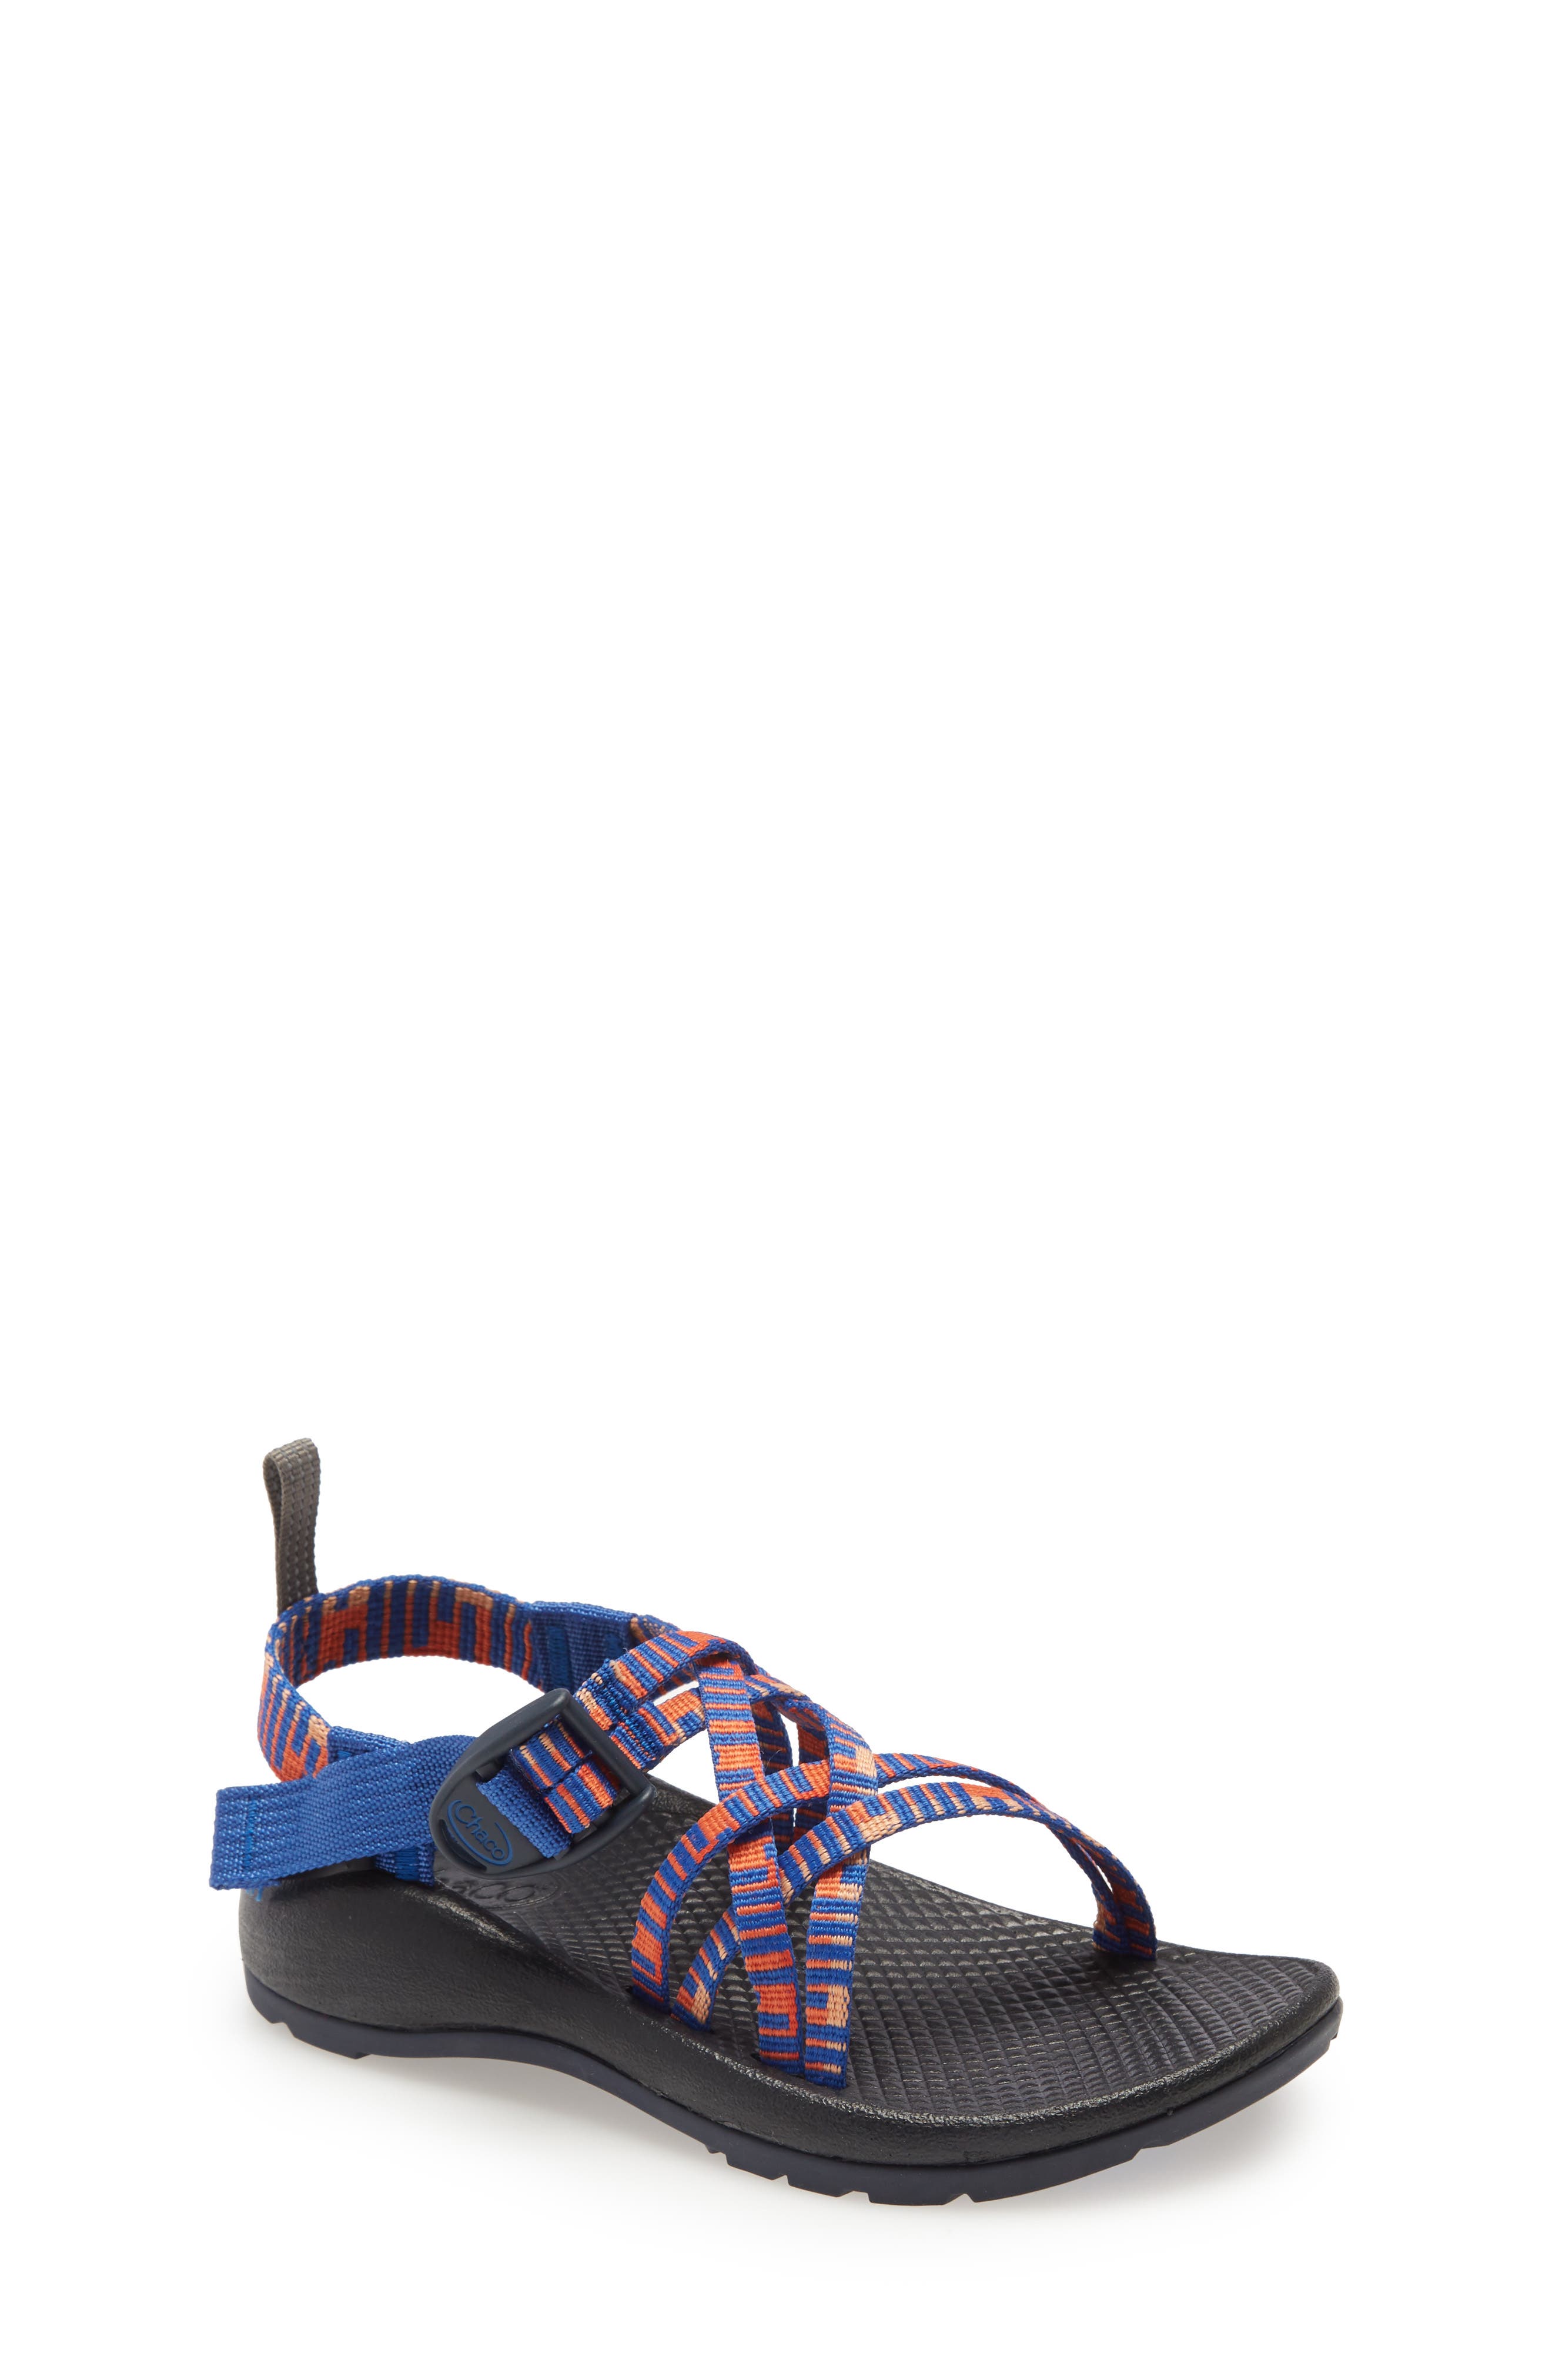 baby chacos size 2